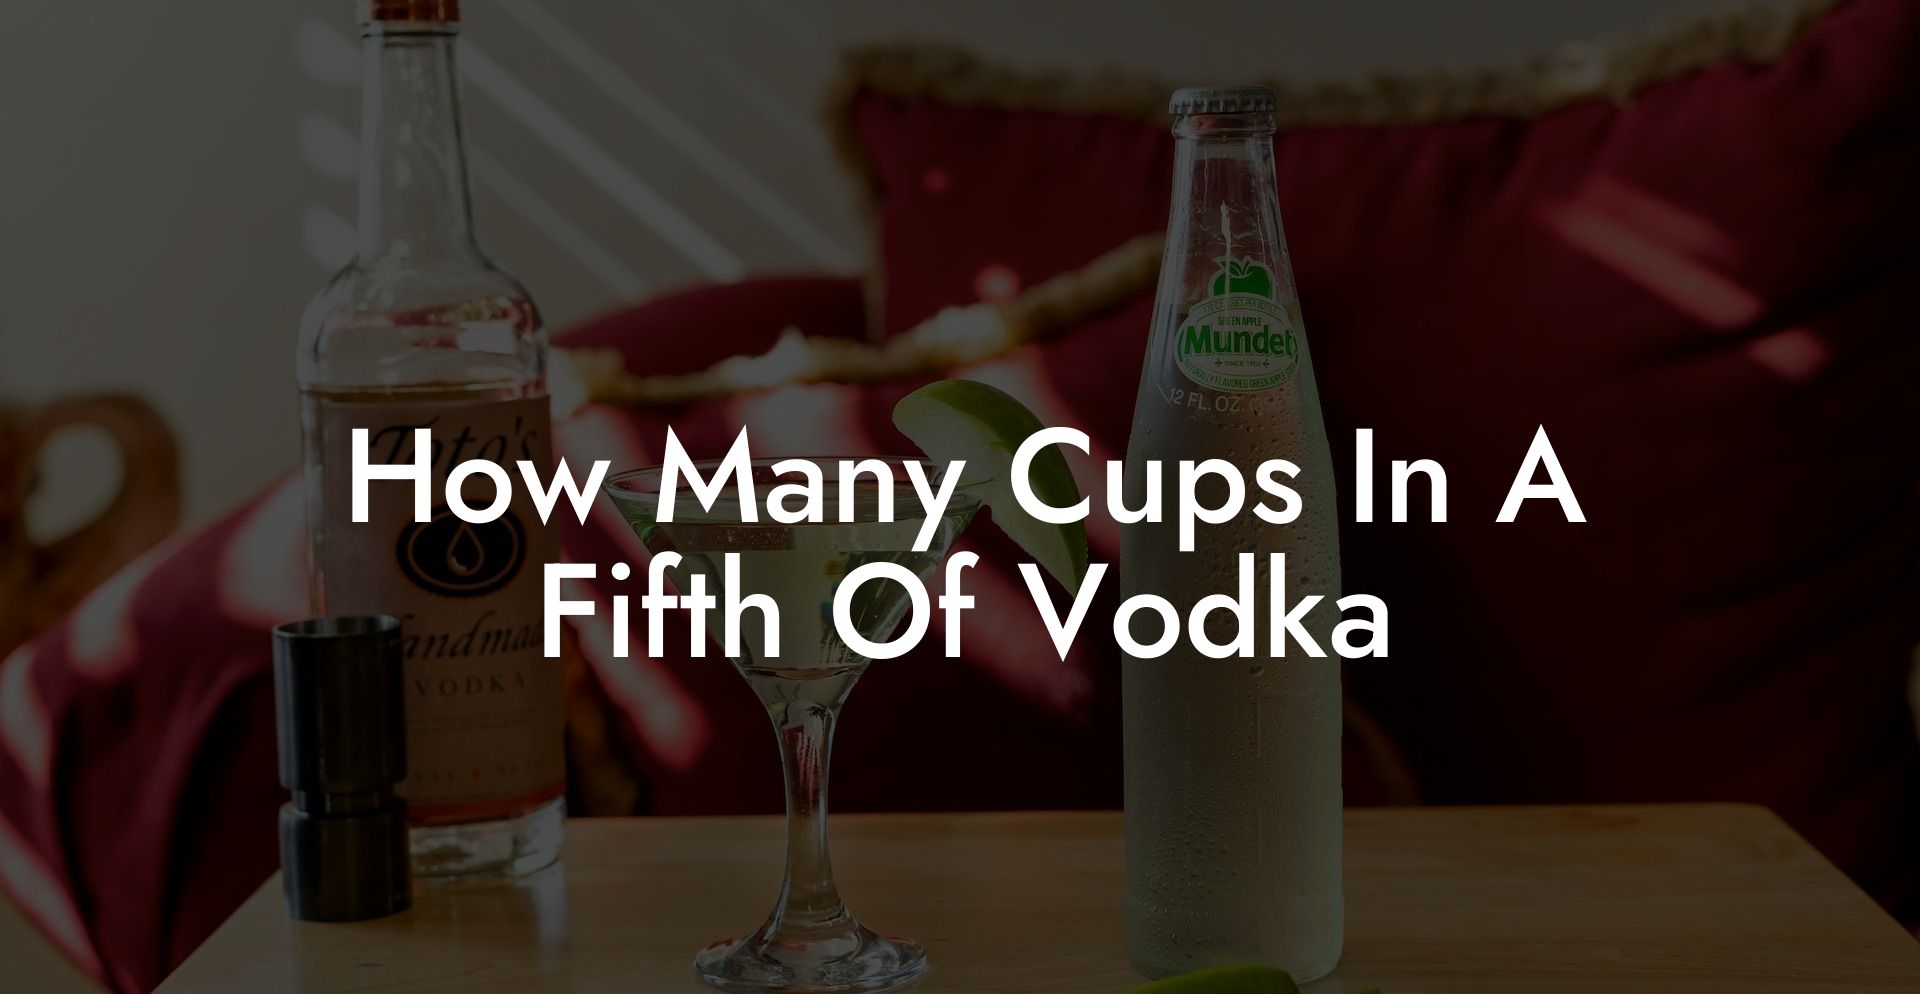 How Many Cups In A Fifth Of Vodka